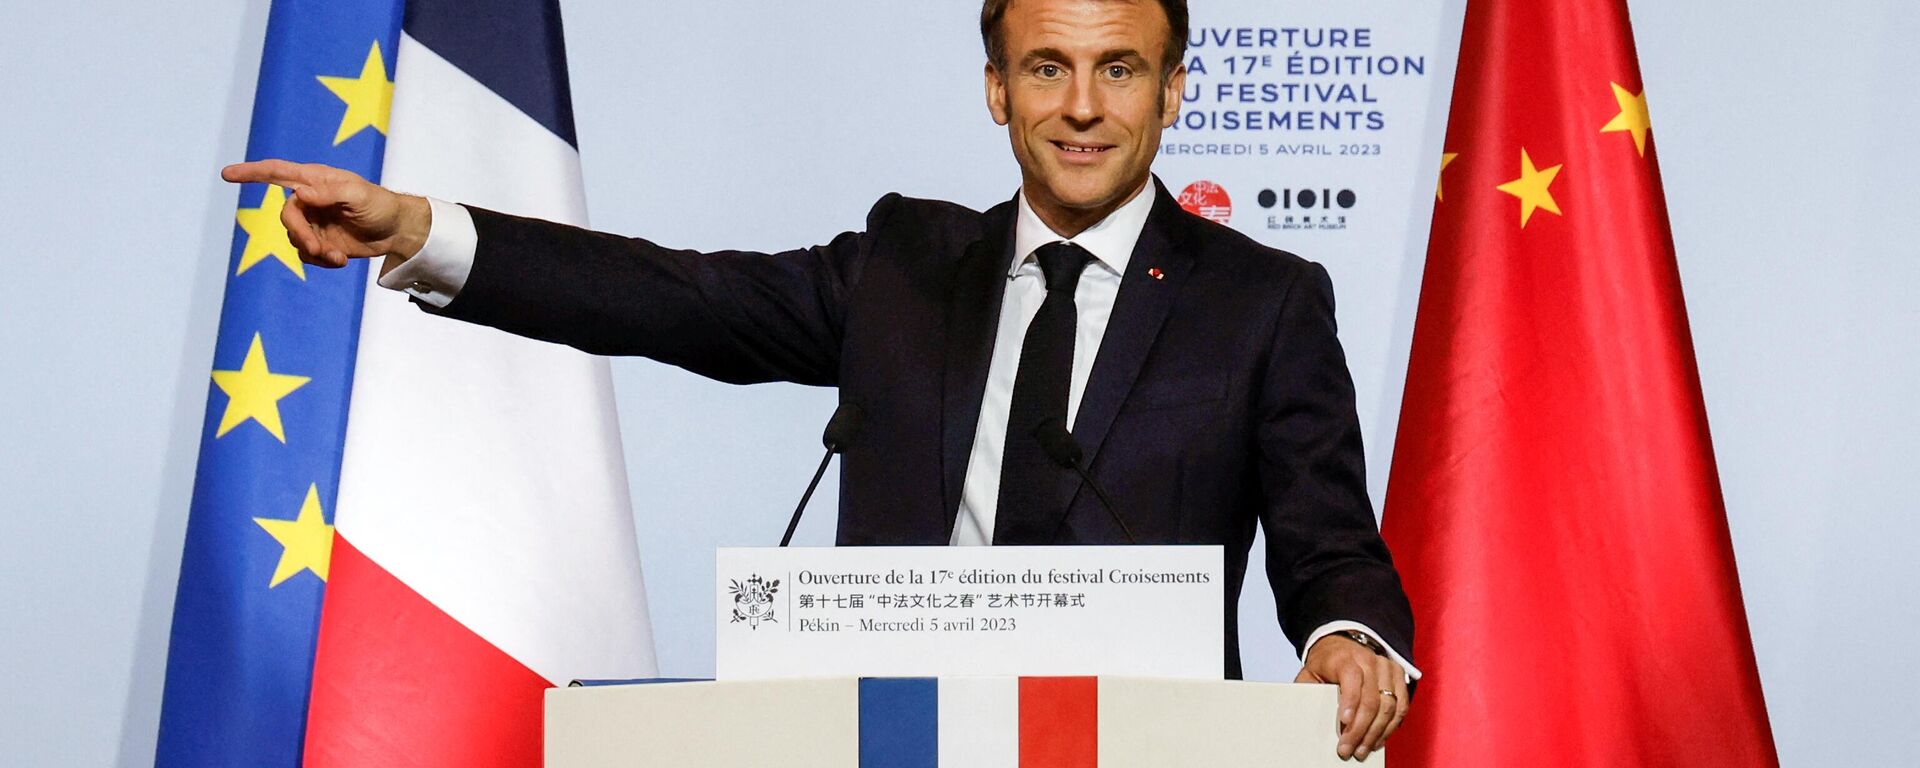 In this picture taken on April 5, 2023, French President Emmanuel Macron delivers a speech at the Red Brick Art Museum in Beijing - Sputnik International, 1920, 06.04.2023